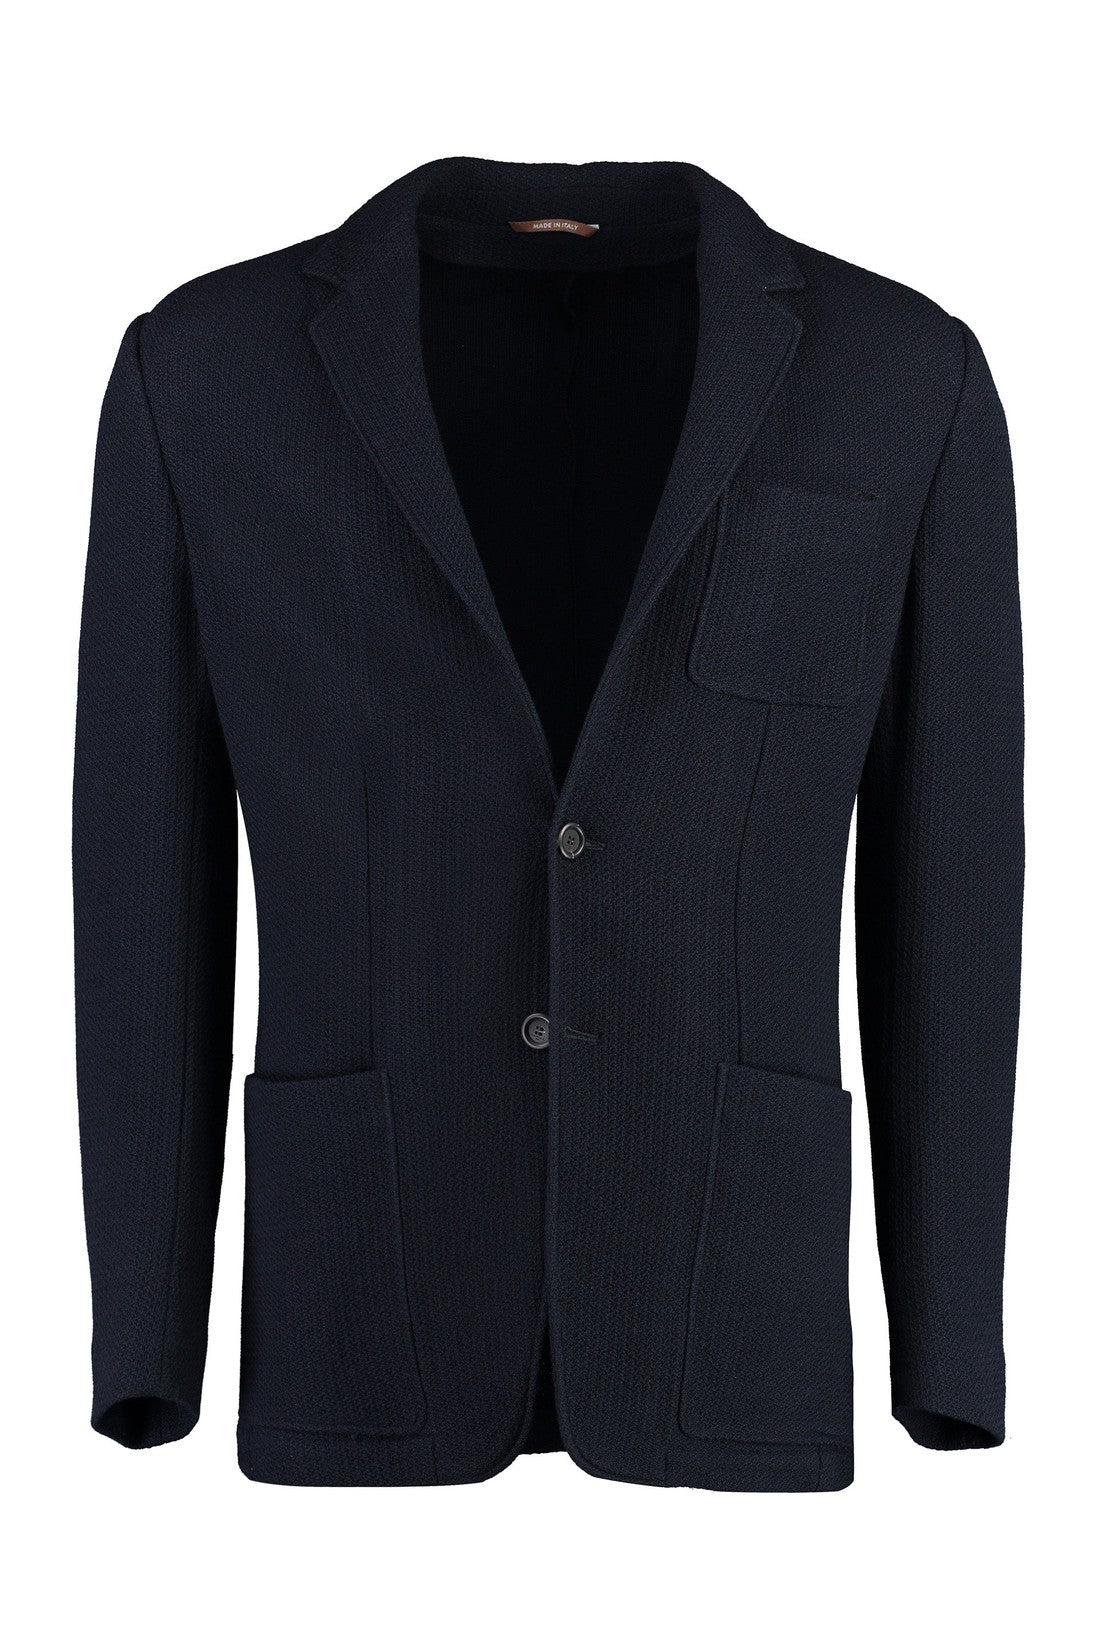 Canali-OUTLET-SALE-Single-breasted wool jacket-ARCHIVIST